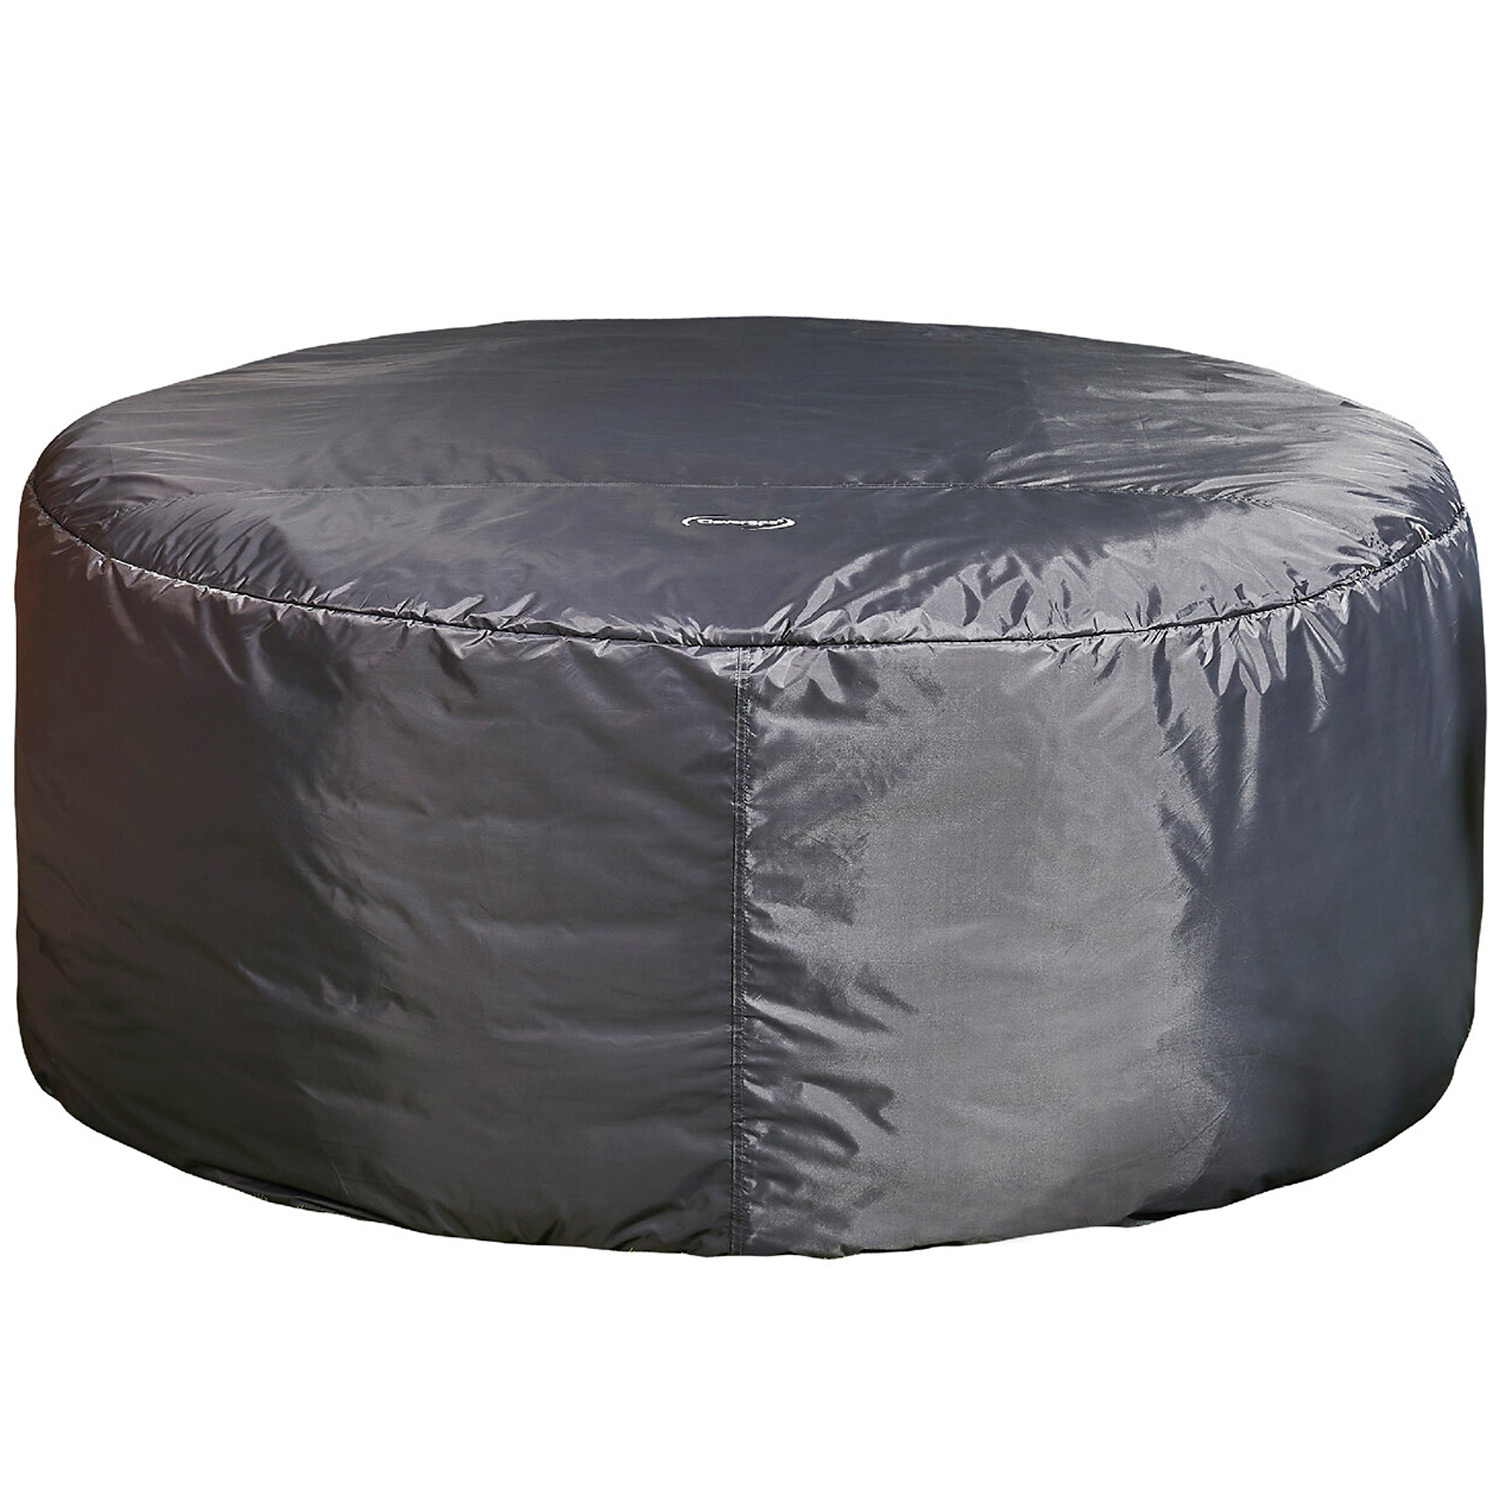 CleverSpa Thermal Cover For Hot Tubs - Grey / 208cm / Round Image 1